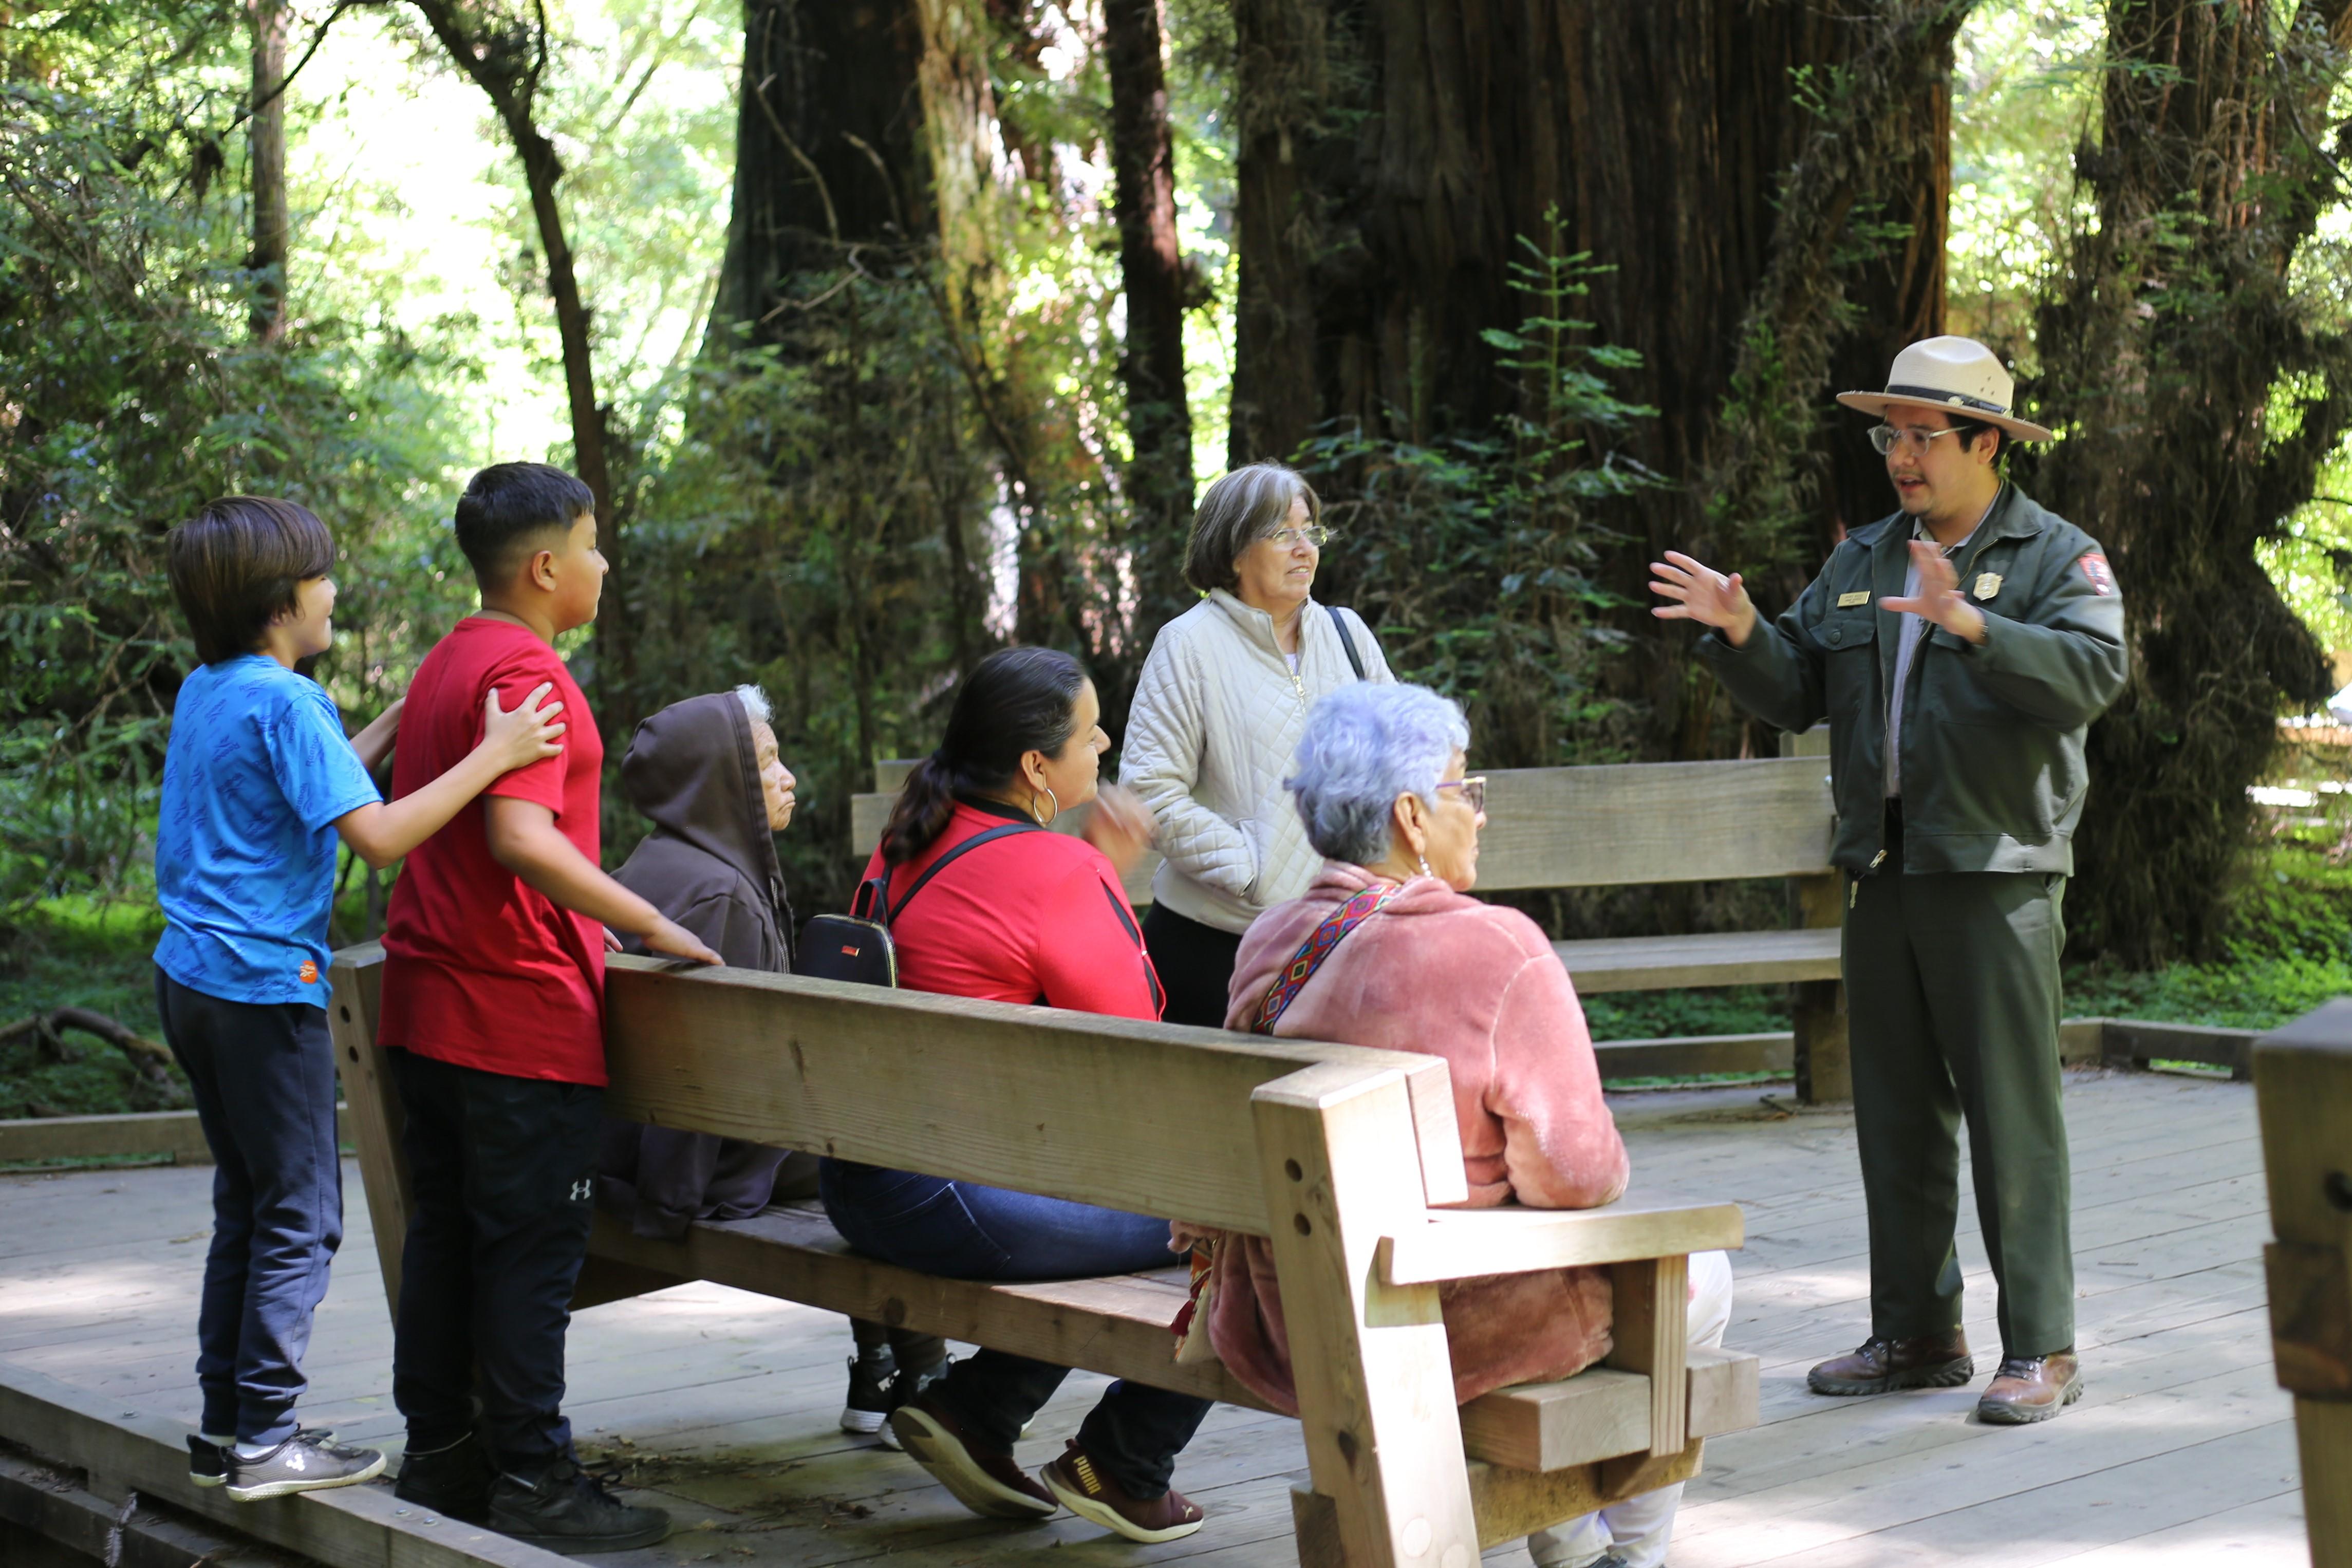 in a shady forest, a ranger in a flat hat and green uniform speaks with a small group of visitors